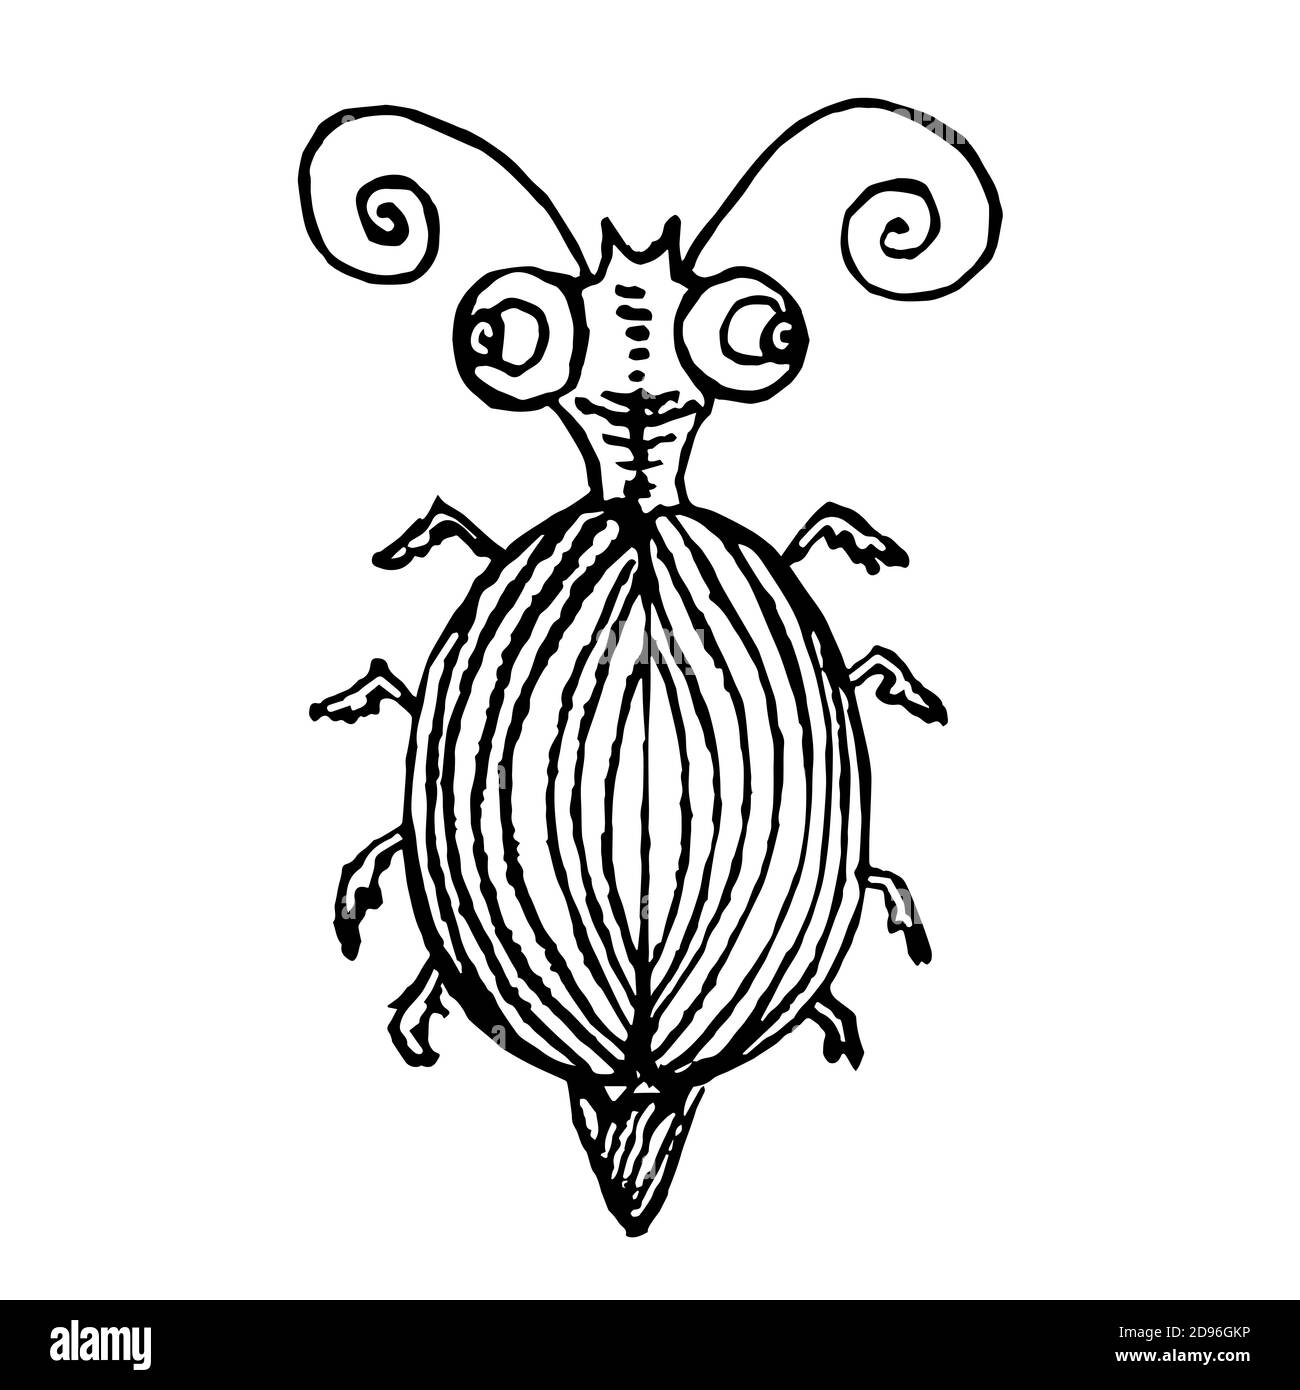 Funny striped bug, hand drawn doodle black and white sketch style, illustration, top view Stock Photo